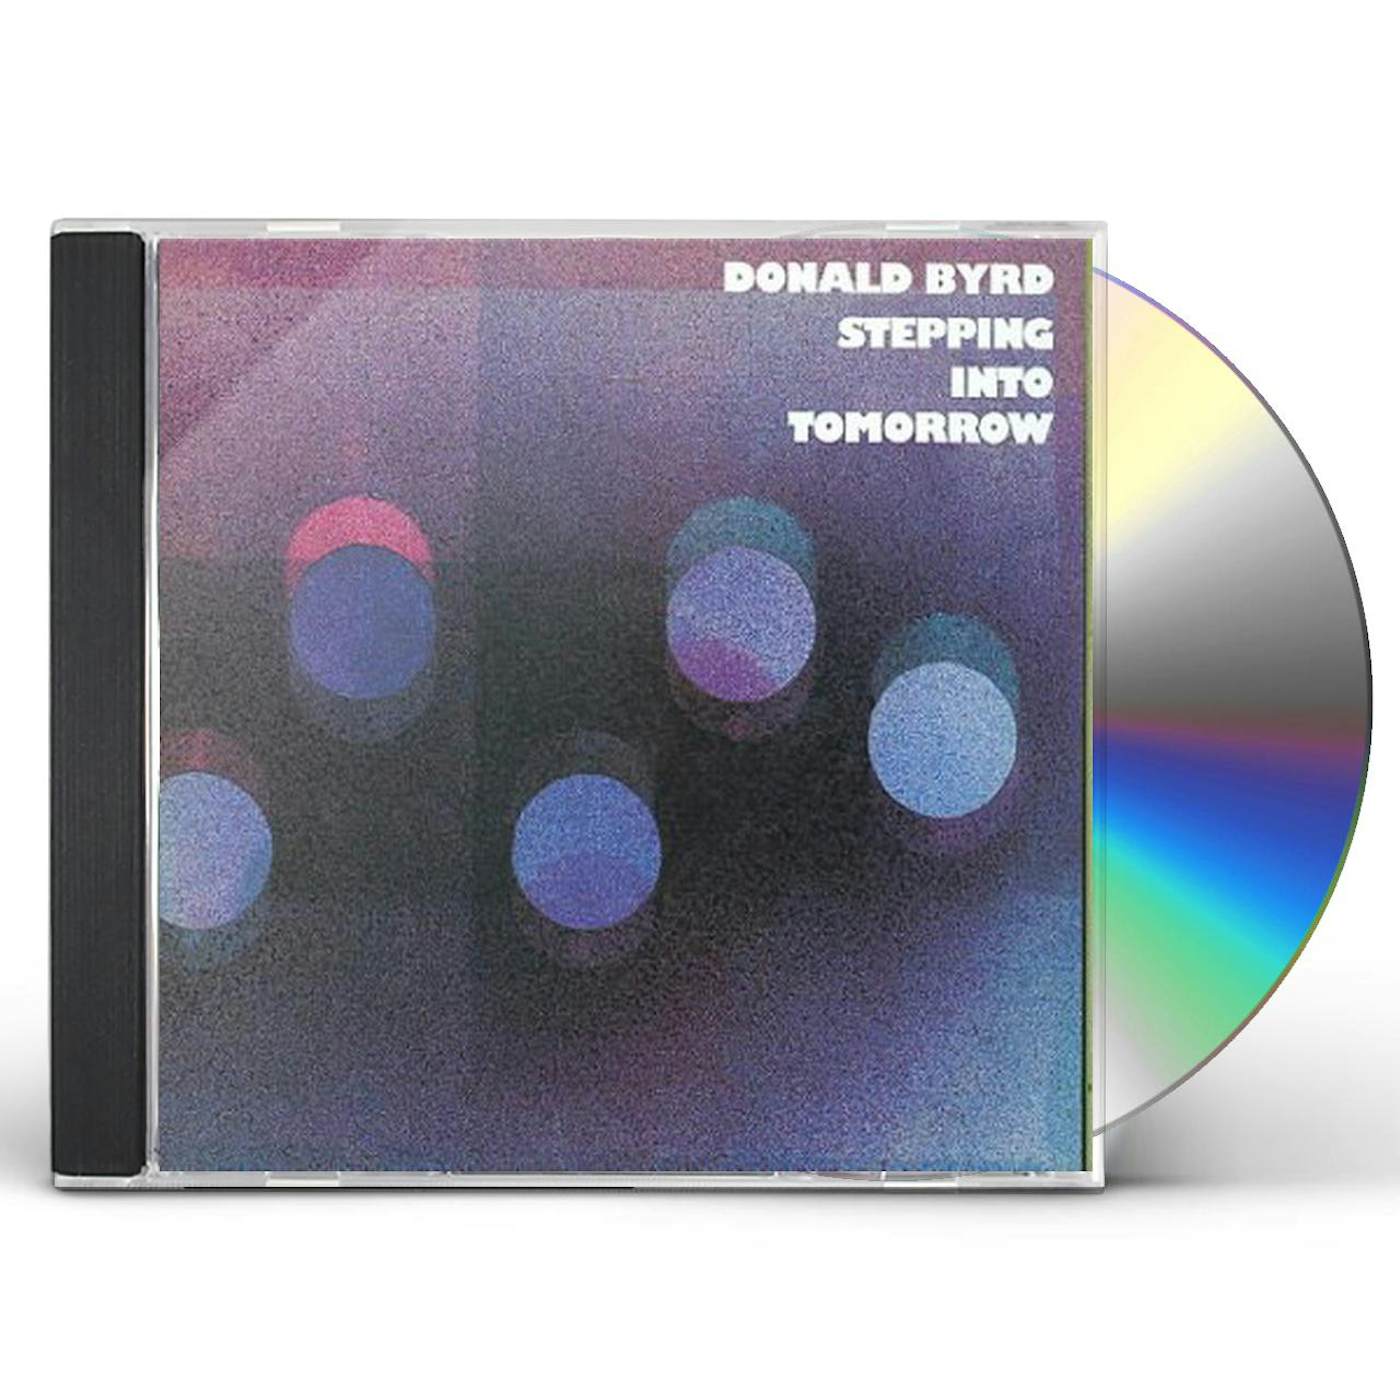 Donald Byrd STEPPING INTO TOMORROW CD